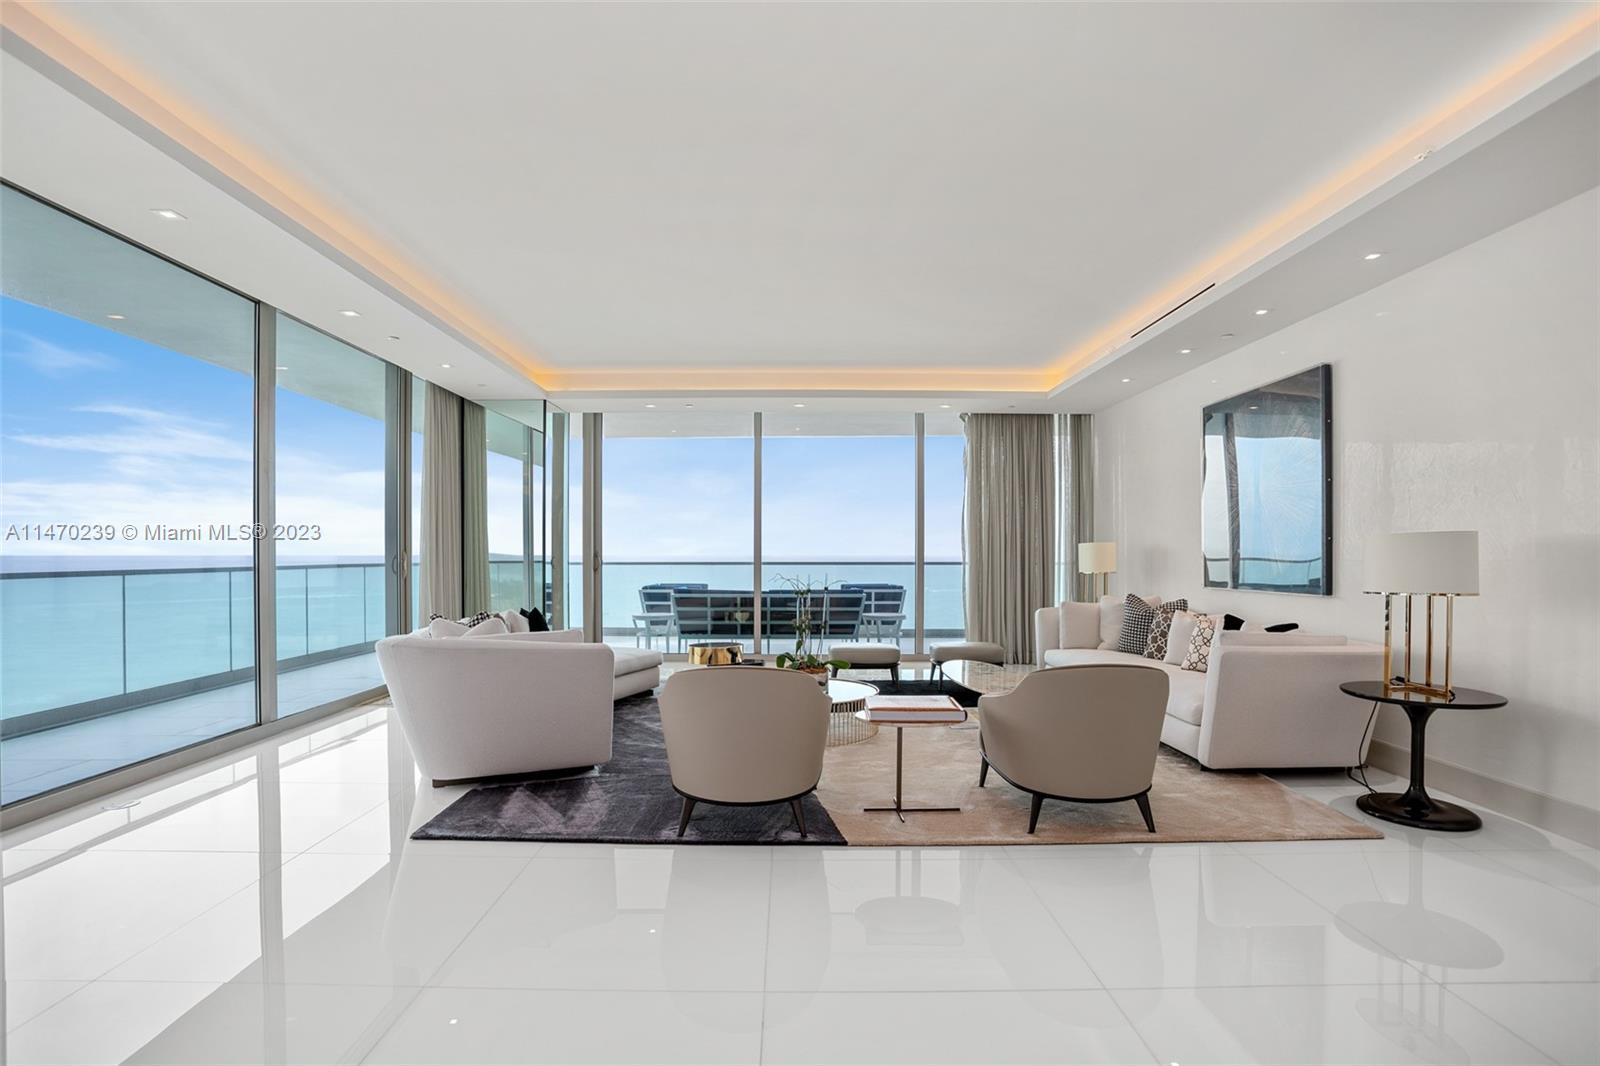 Stunning fully furnished corner 3 bed/3.5 bath unit at the prestigious Oceana residences in BalHarbo